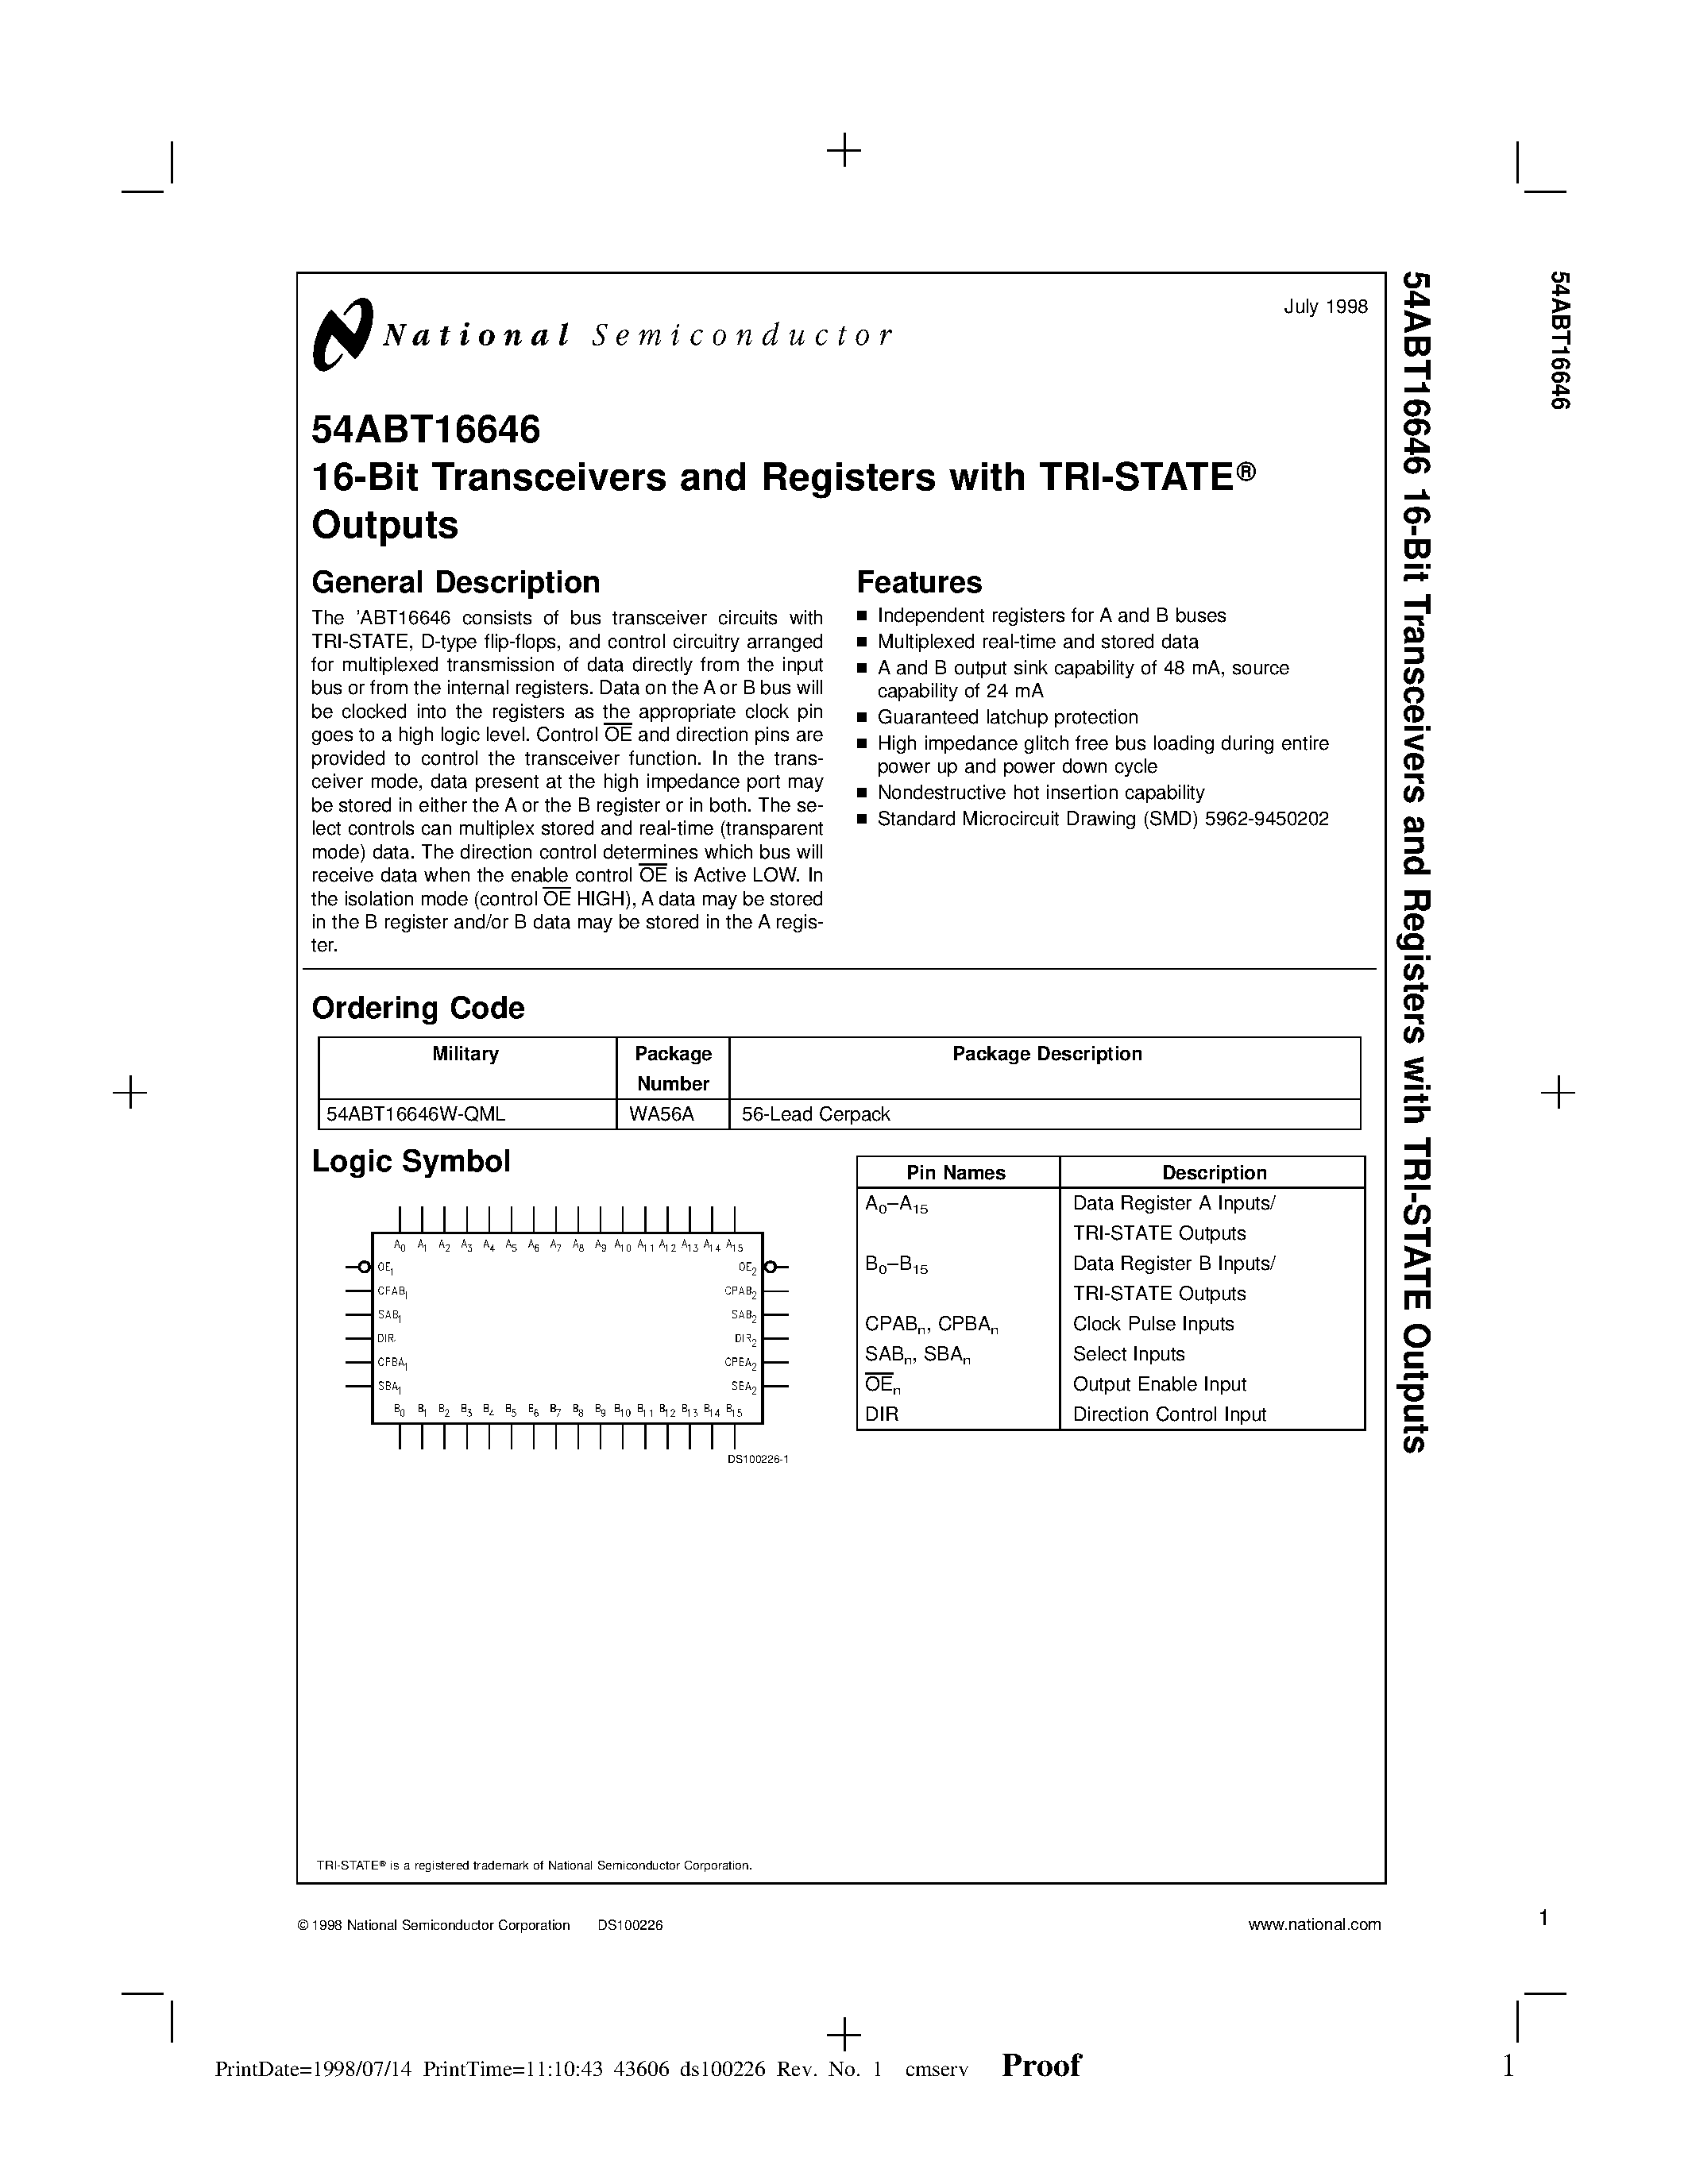 Datasheet 54ABT16646W-QML - 16-Bit Transceivers and Registers with TRI-STATE Outputs page 1